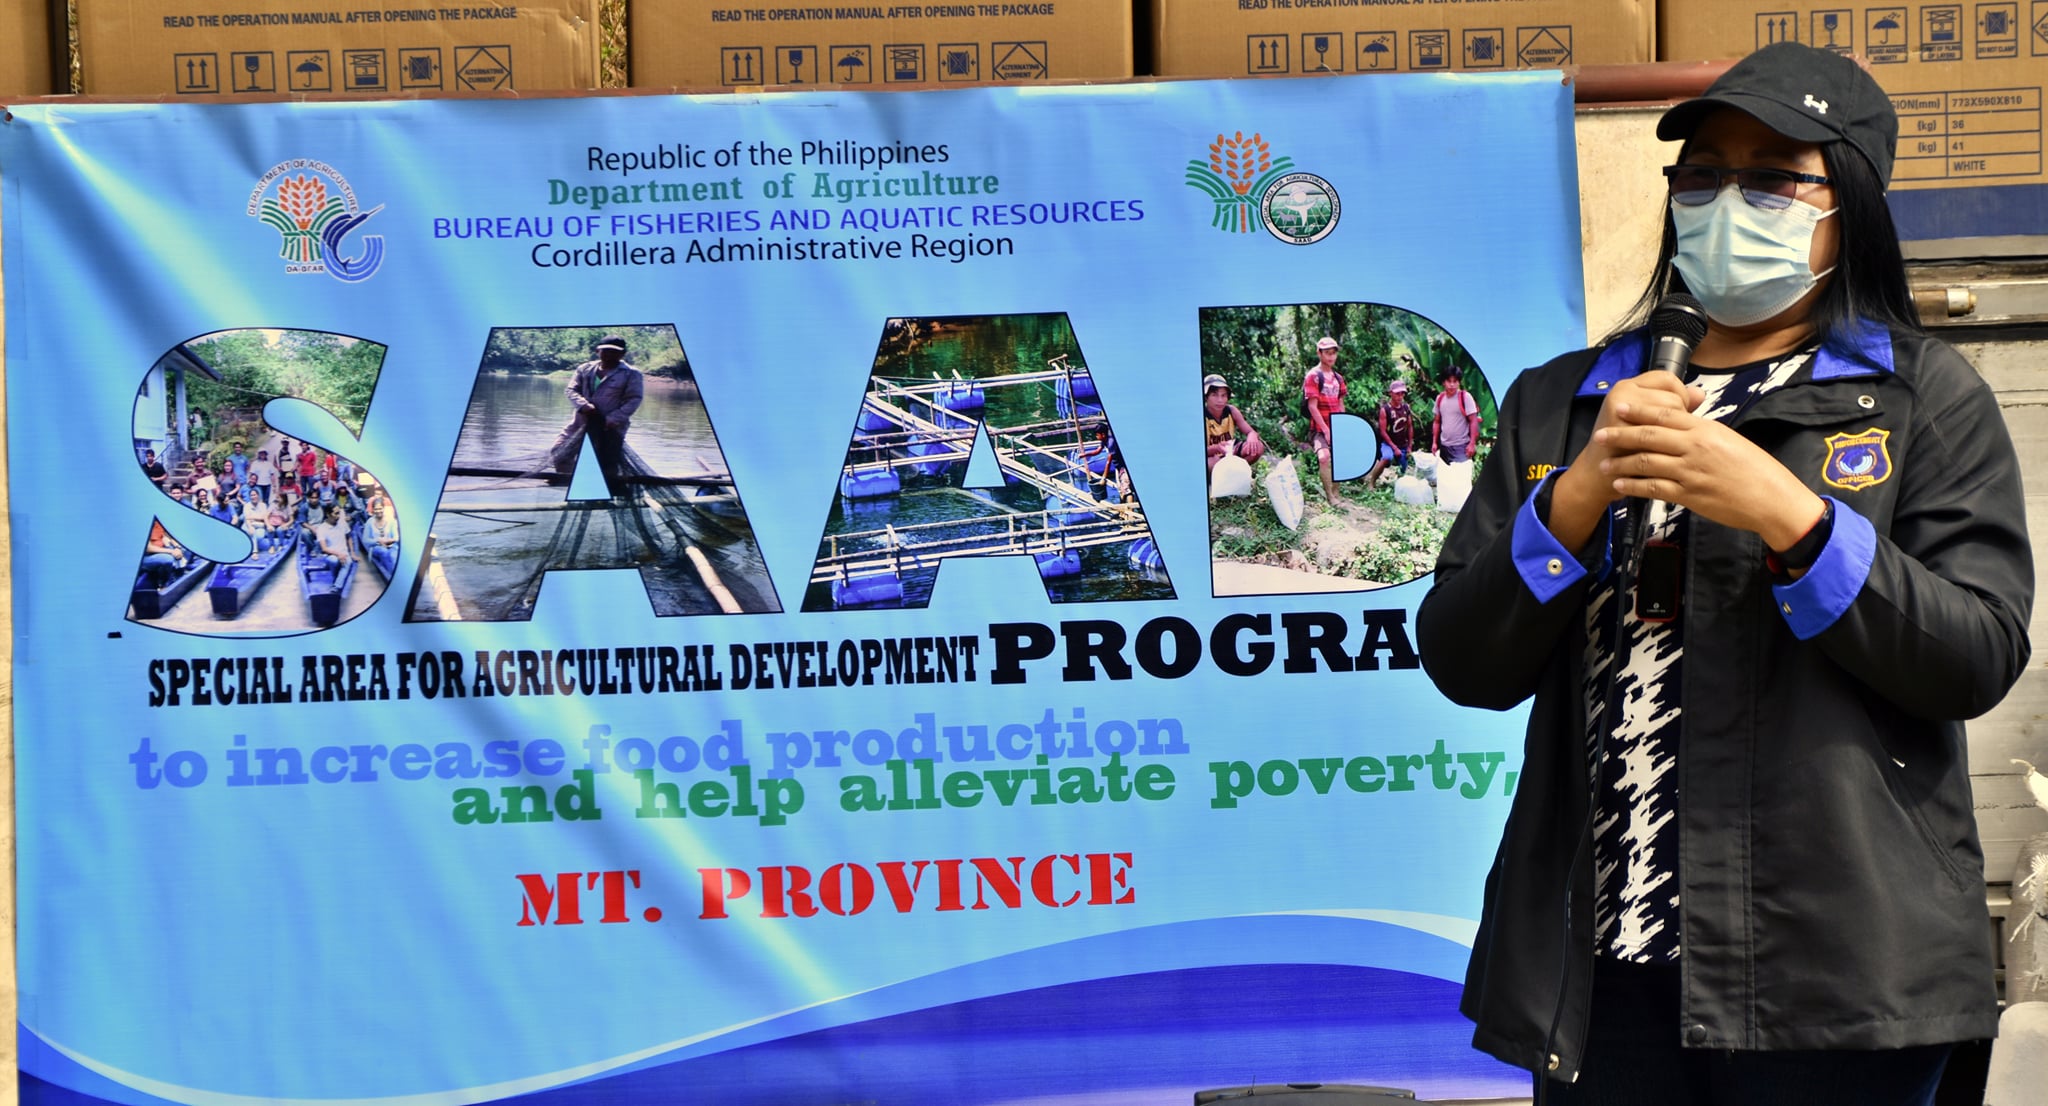 Postharvest equipment worth Php 868k granted to FOs of Mt. Province